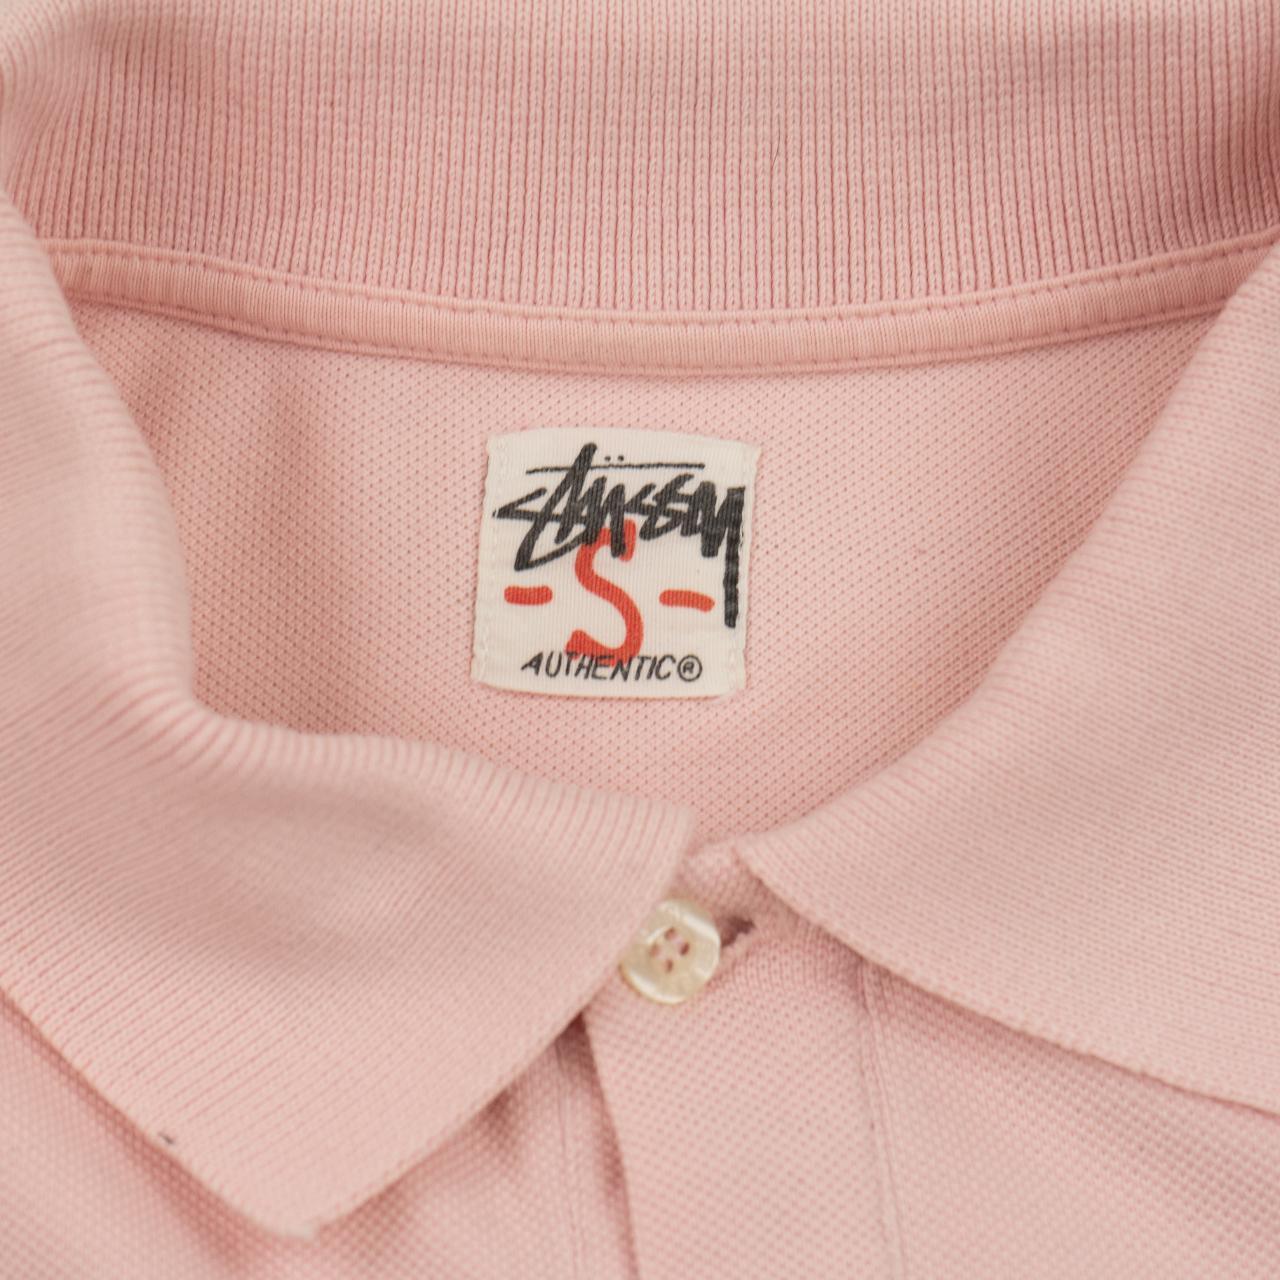 Vintage Stussy Polo Shirt Size S - Known Source